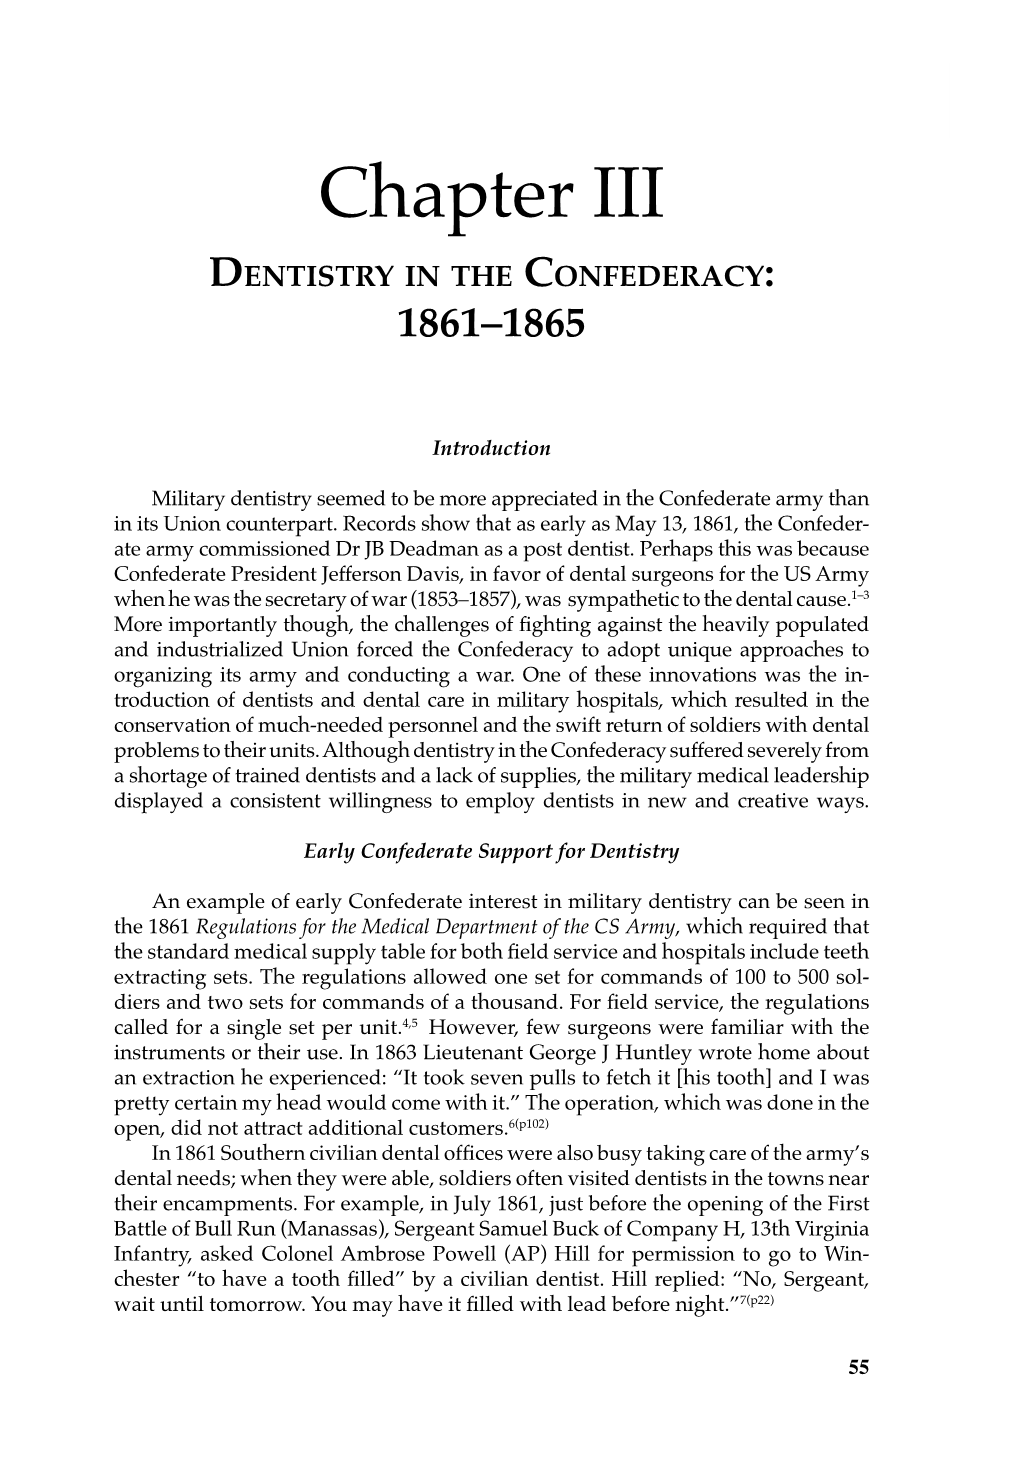 Chapter III, Dentistry in the Confederacy